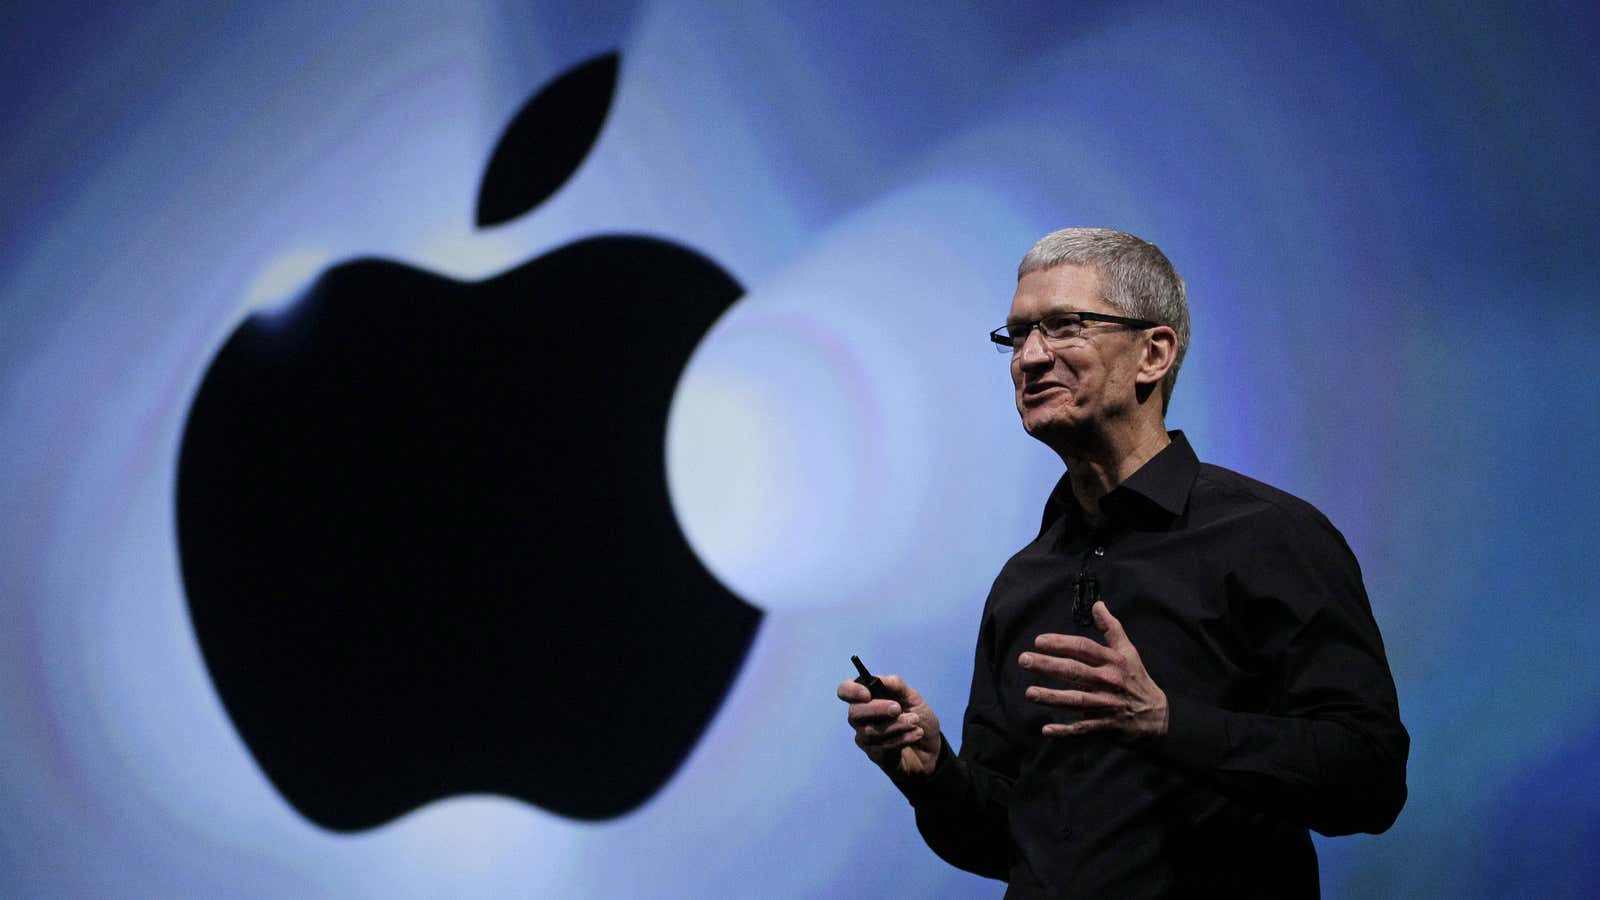 Tim Cook on peak smartphone: “I don’t believe that.”